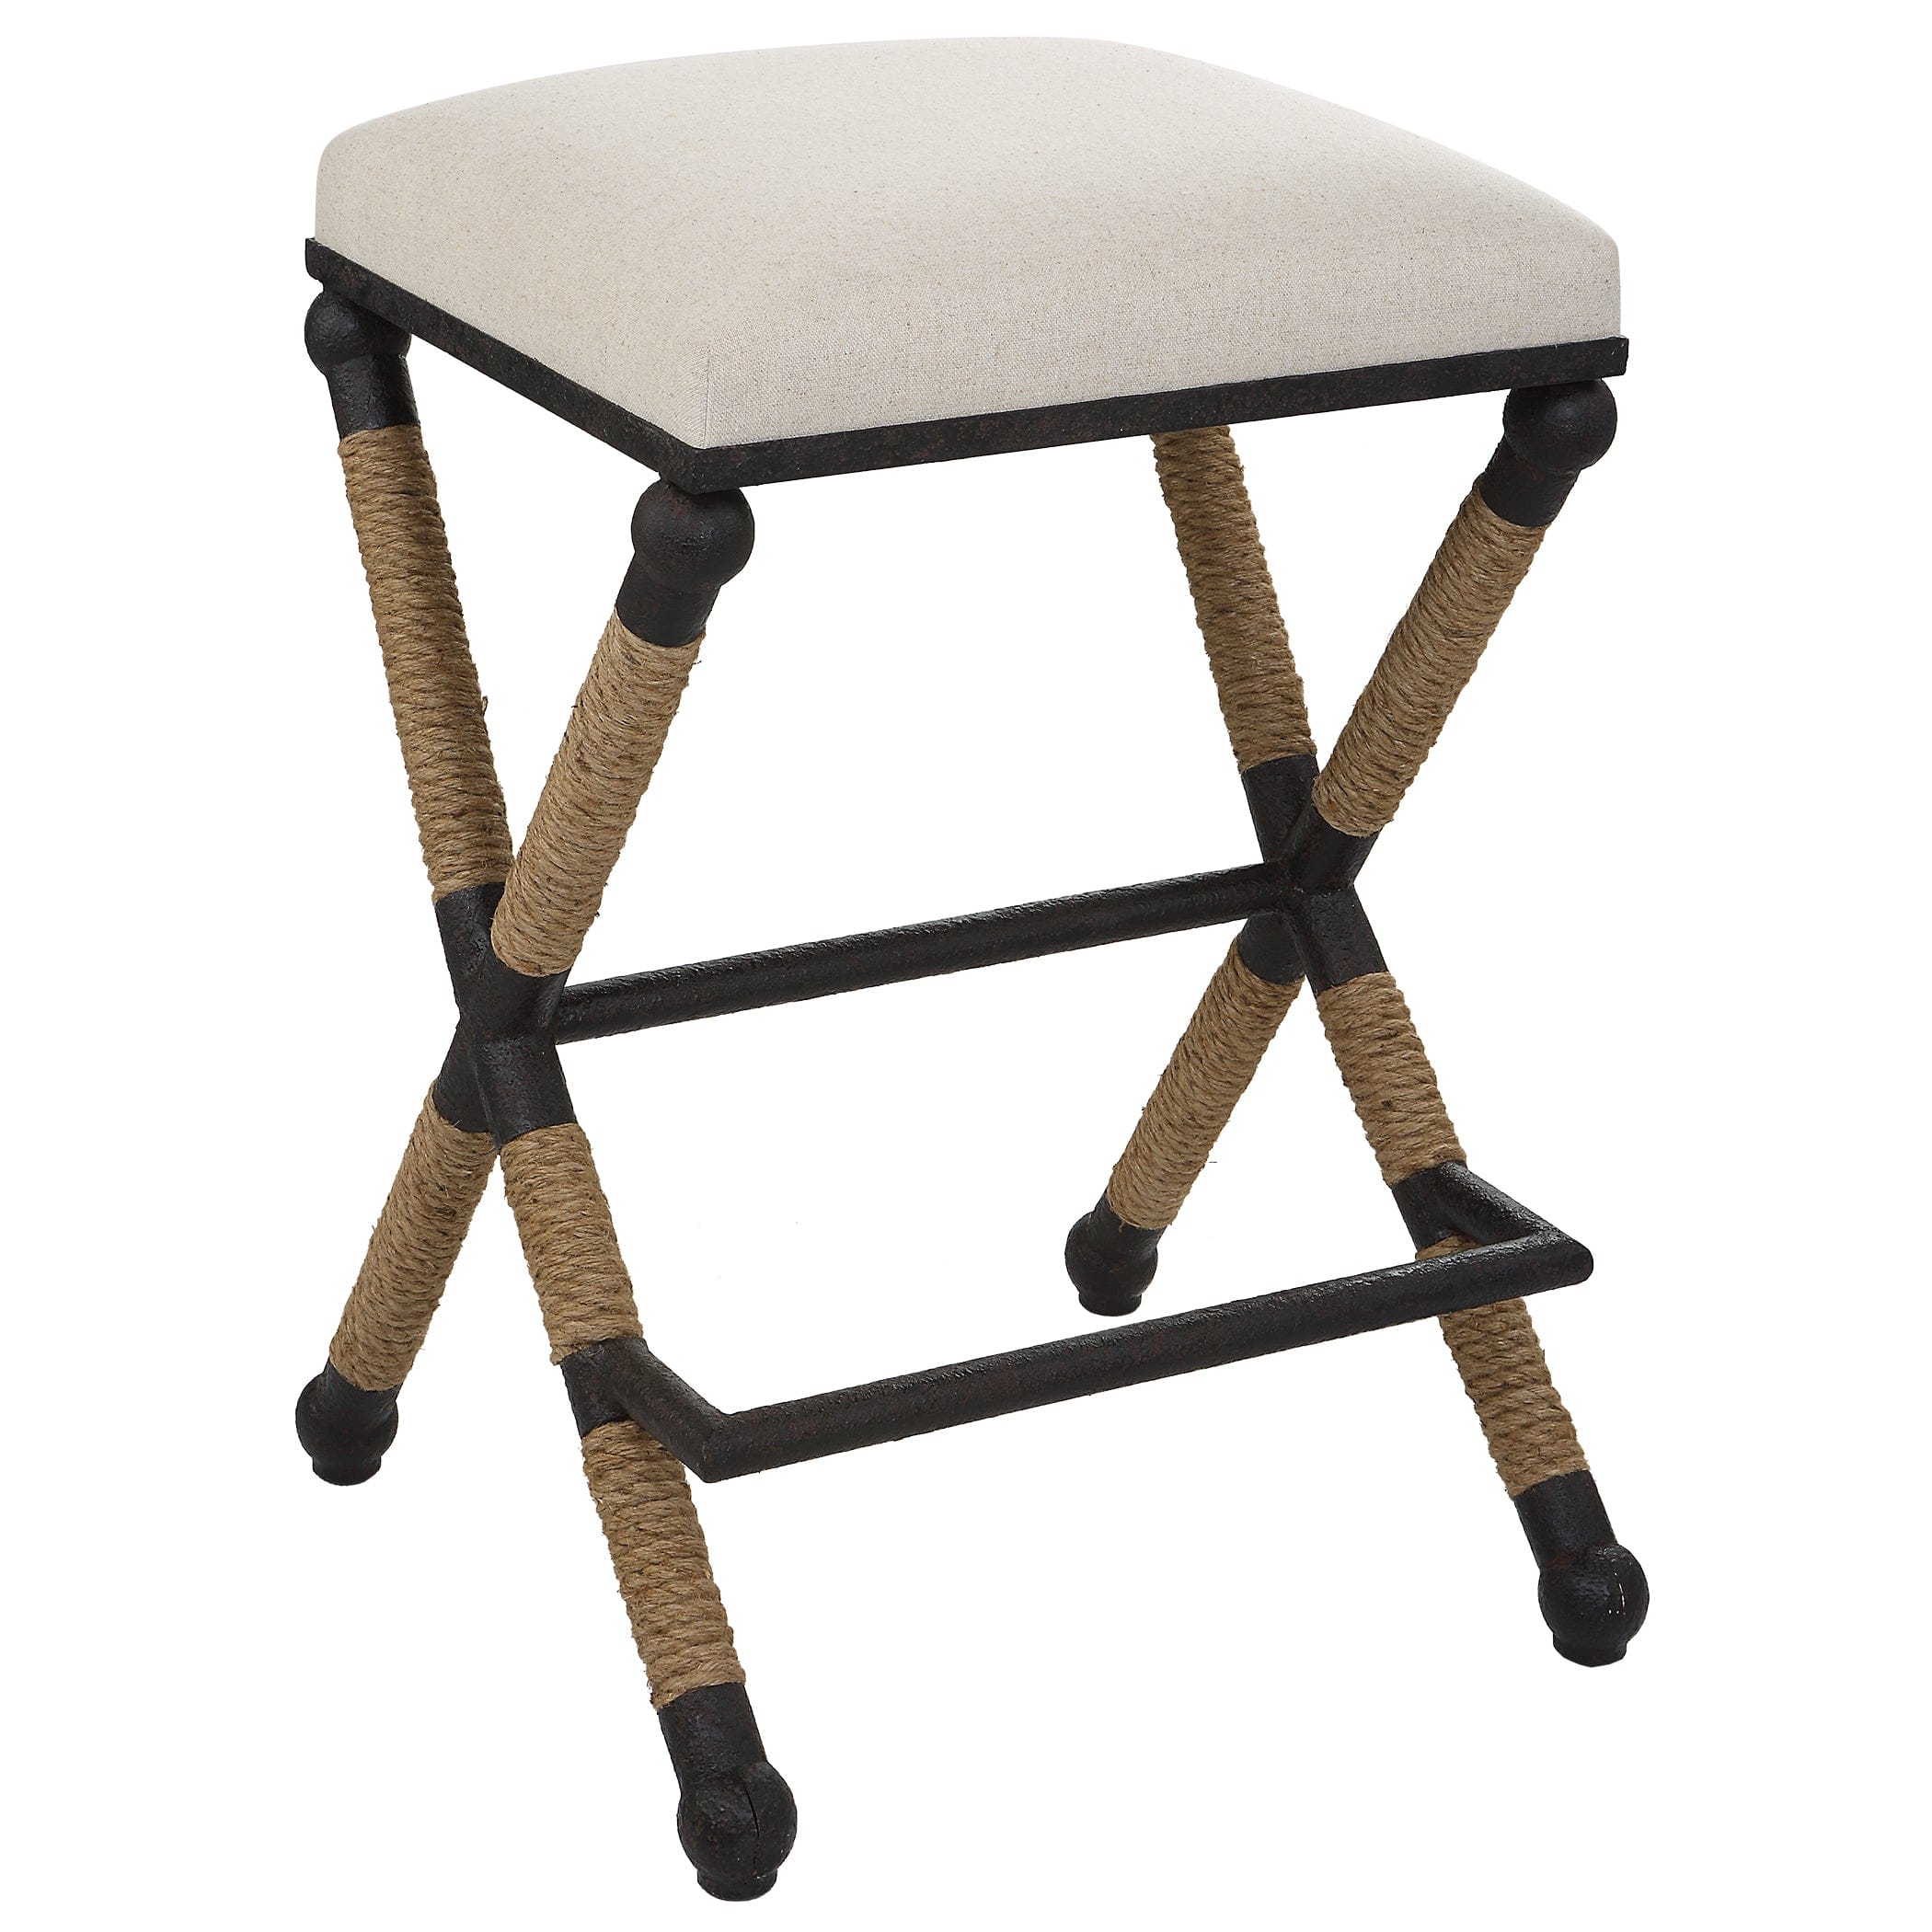 Firth Rustic Oatmeal Counter Stool Uttermost